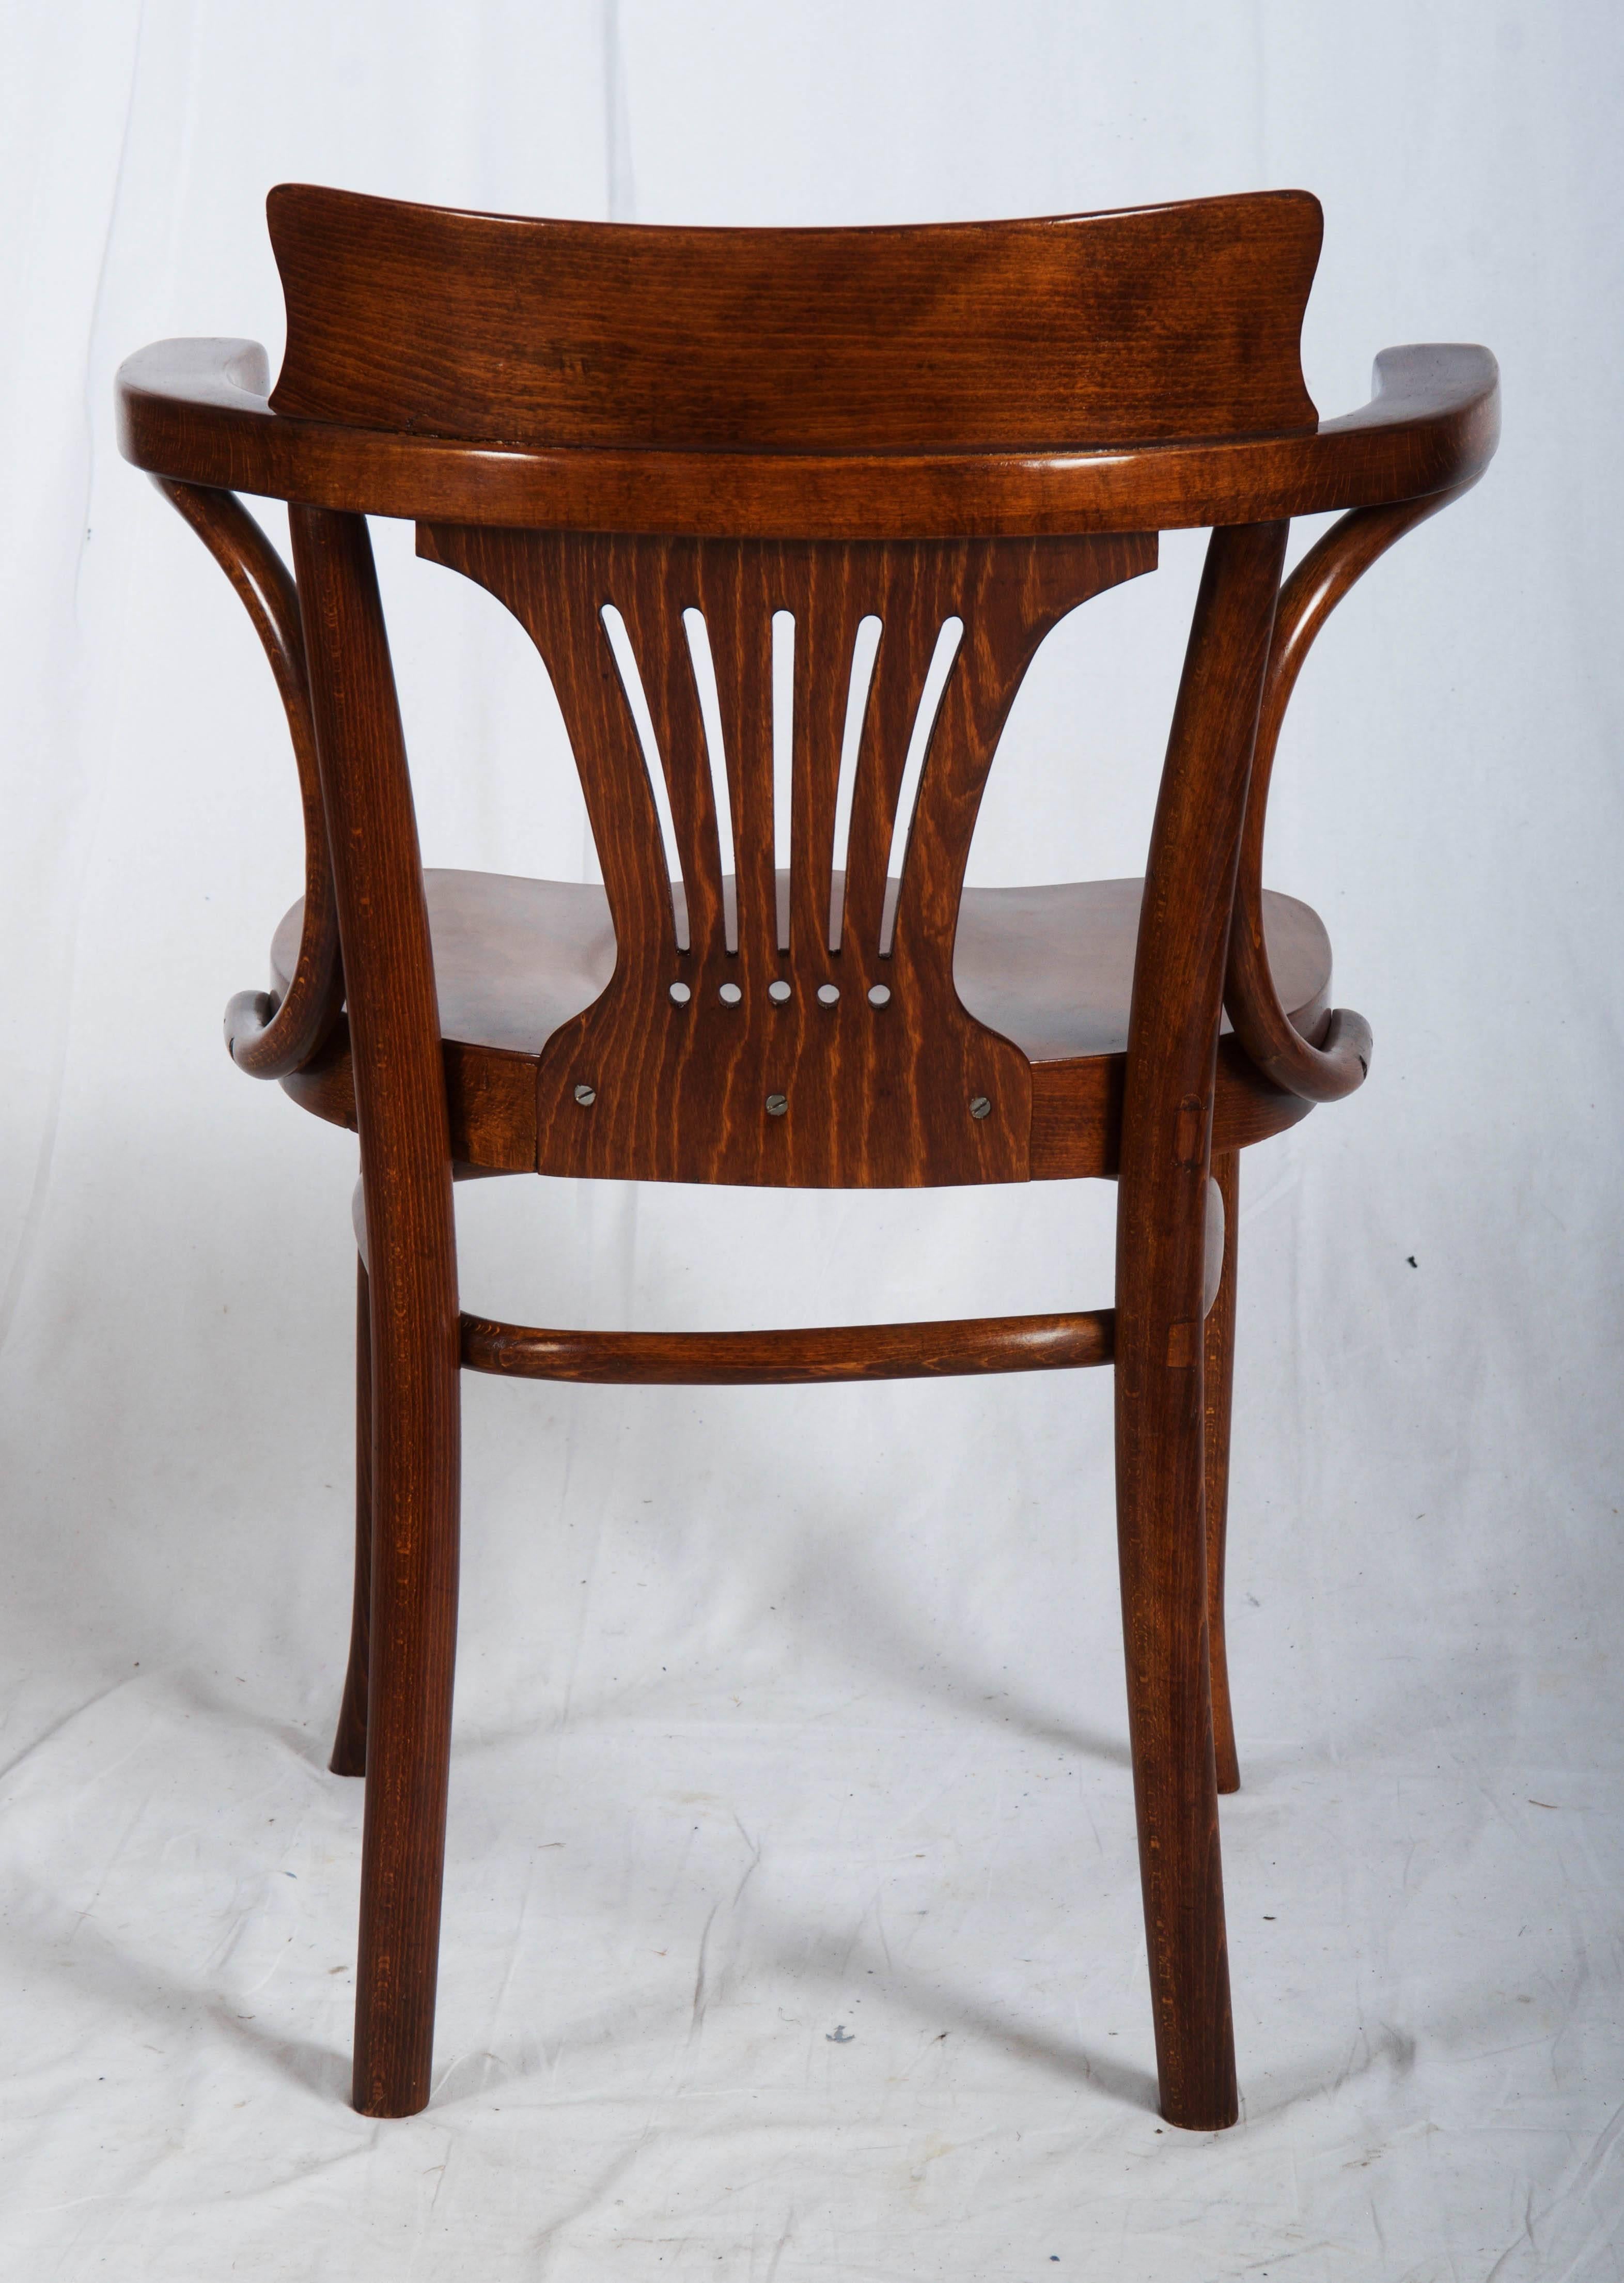 Beech bentwood Thonet catalog number 6070 fully restored made in Austria in the 1920s but the original design was created in the 1900-1905.